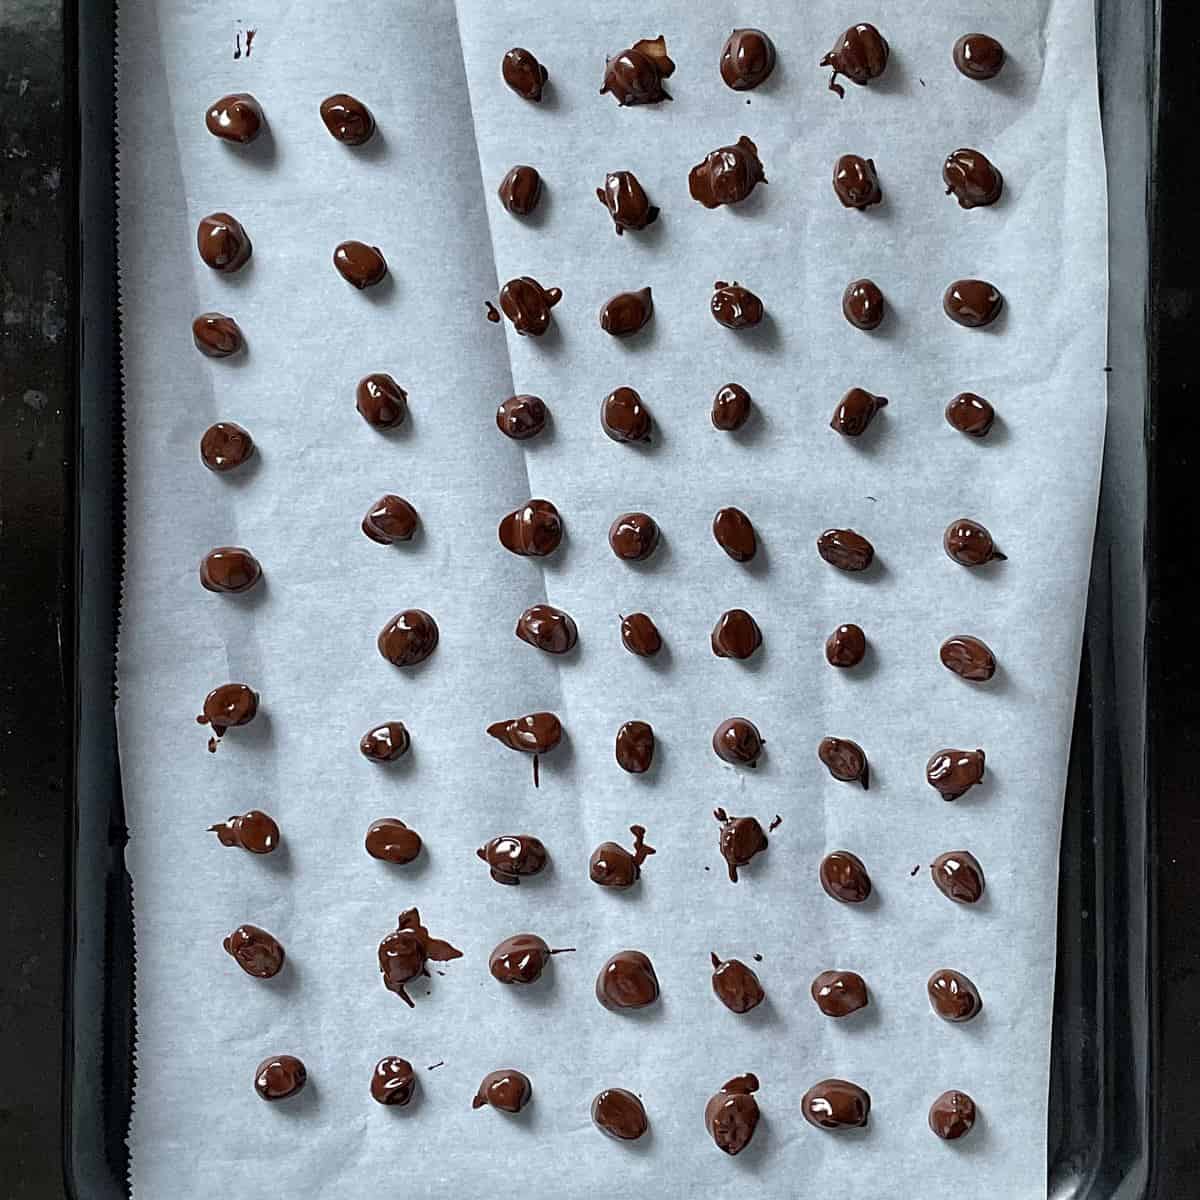 Chocolate coffee beans on parchment paper.